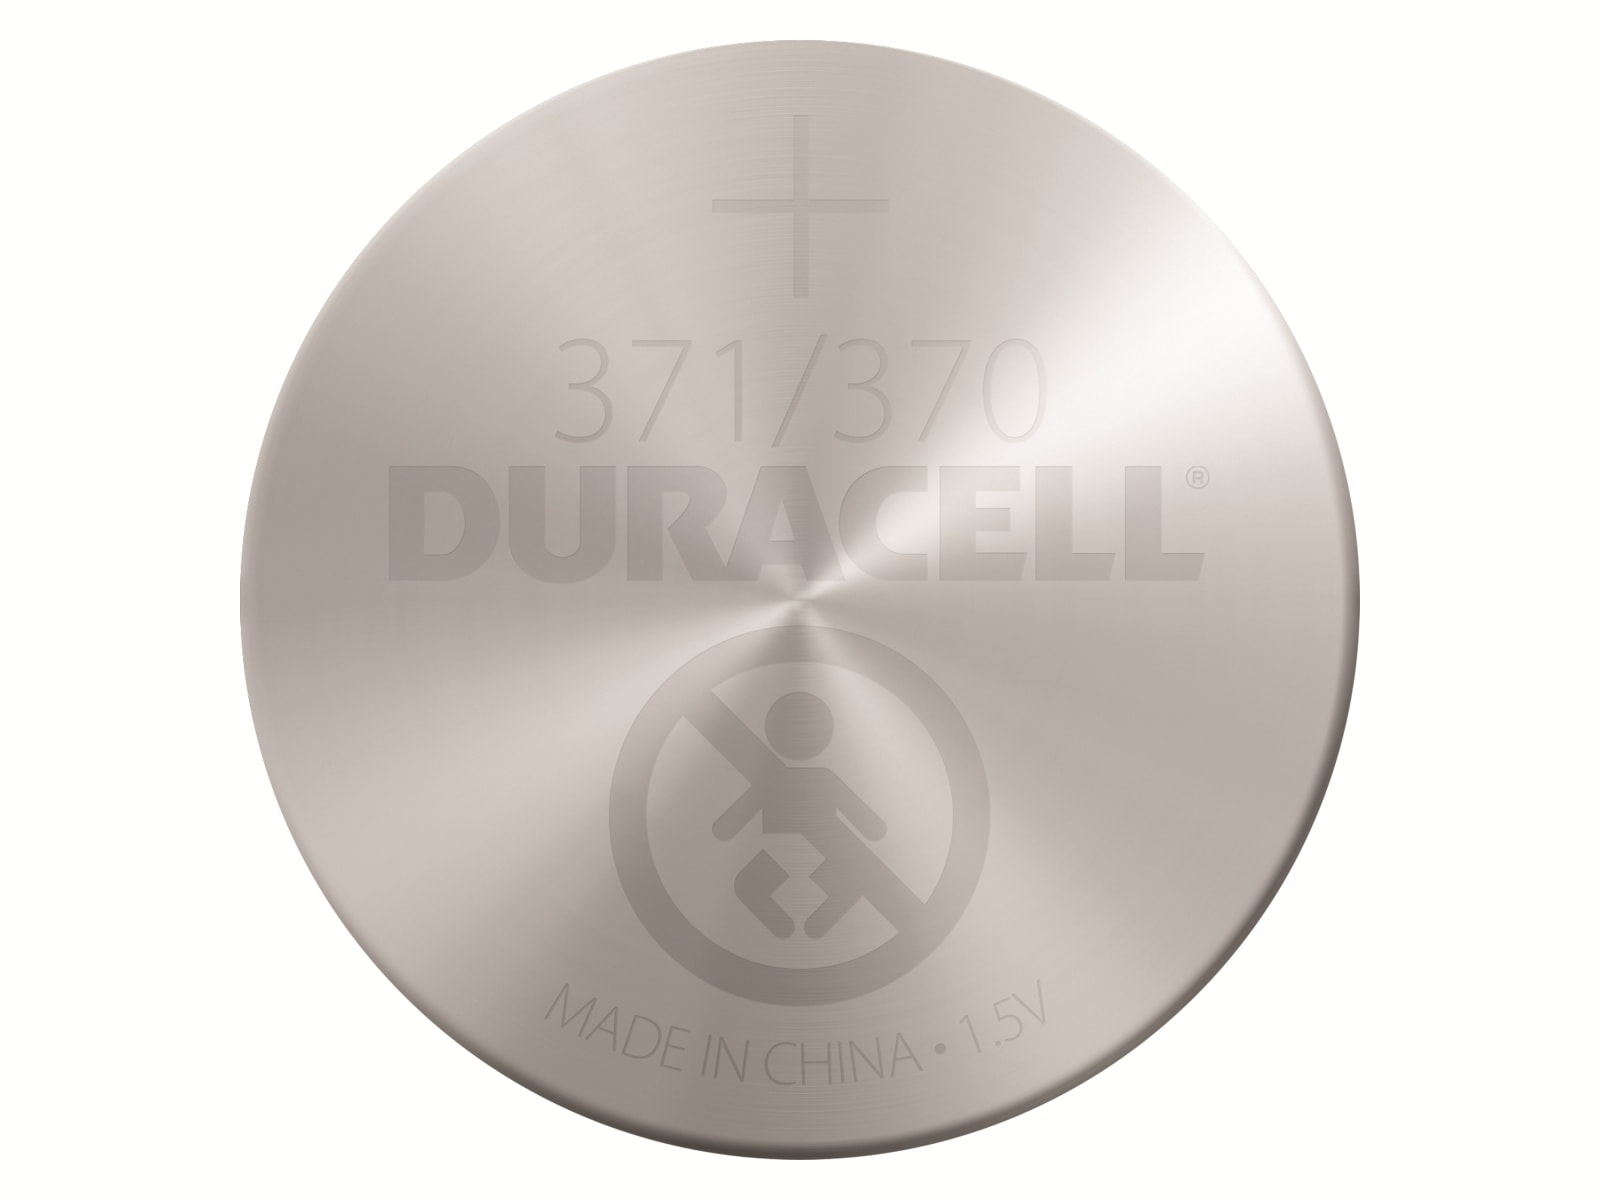 DURACELL Silver Oxide-Knopfzelle SR69, 1.5V, Watch